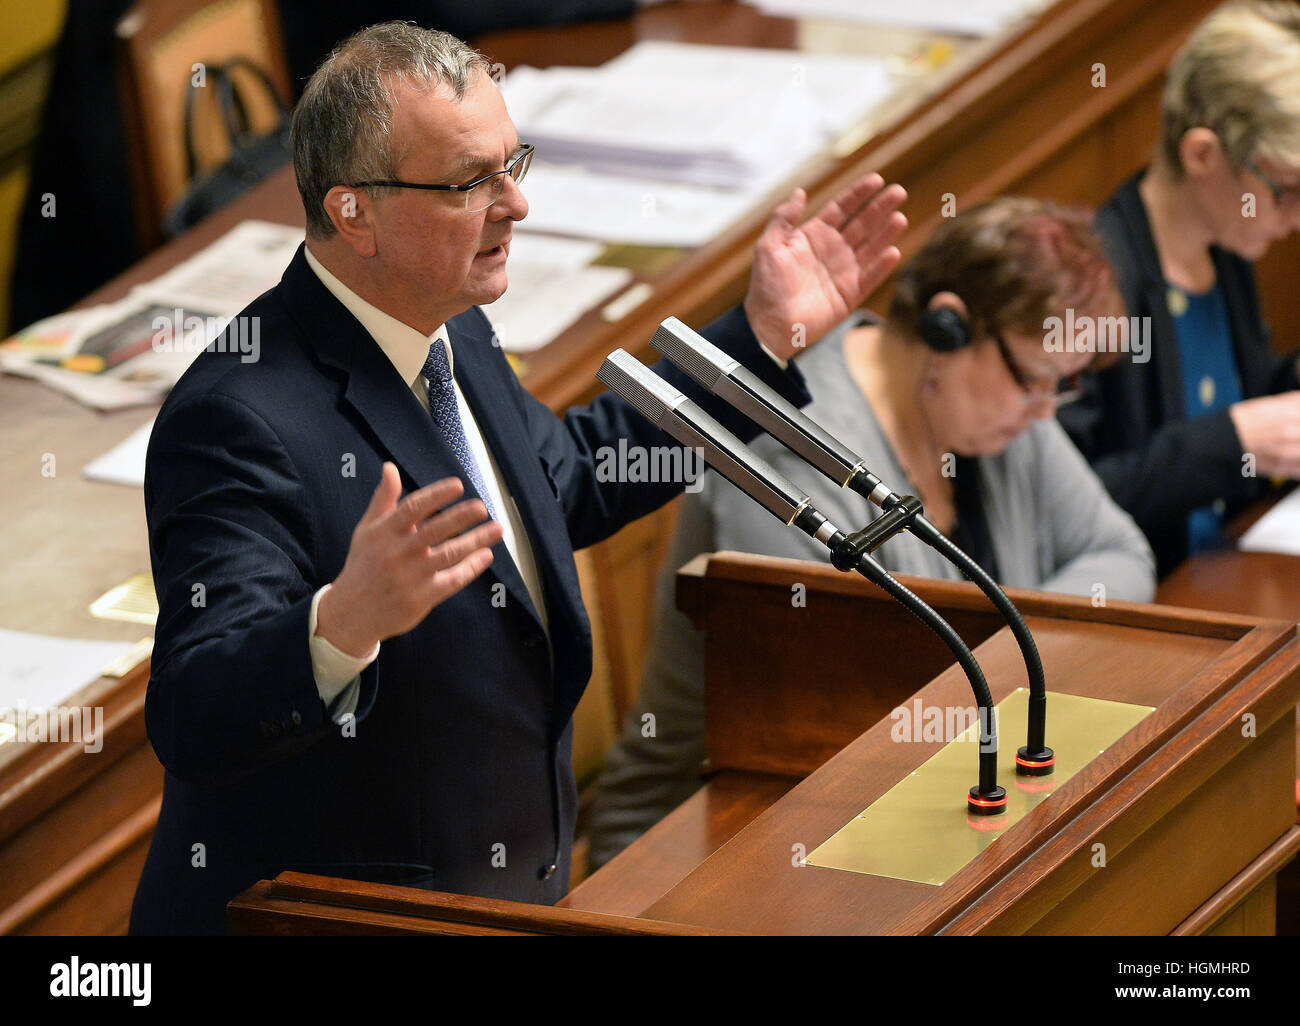 Prague, Czech Republic. 11th Jan, 2017. Lower house regular session continues, to vote on amendment to conflict of interests law vetoed by President Milos Zeman. MPs are likely to override the veto. TOP 09 head Miroslav Kalousek speaks about restricts the business activities of ministers in Czech Chamber of Deputies in Prague, Czech Republic, January 11, 2017. © Katerina Sulova/CTK Photo/Alamy Live News Stock Photo